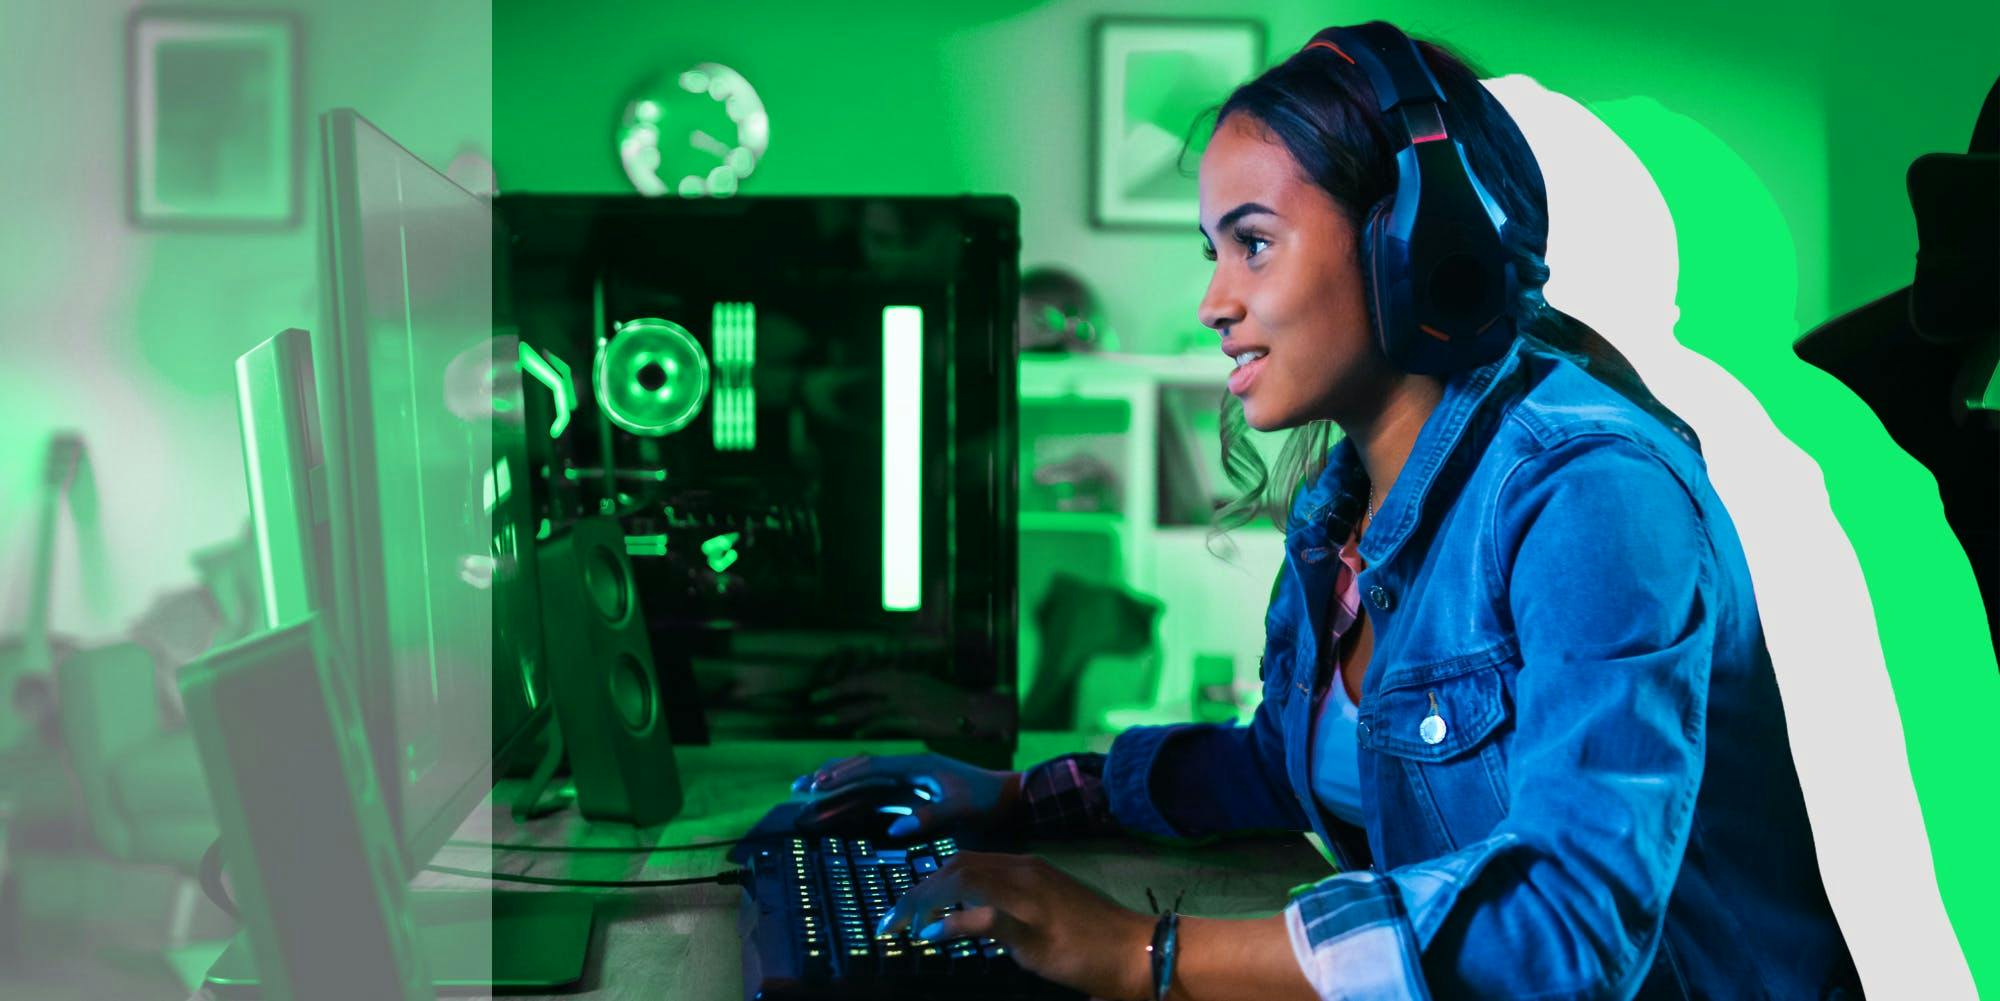 Pakistan’s gaming industry is the perfect fit for women